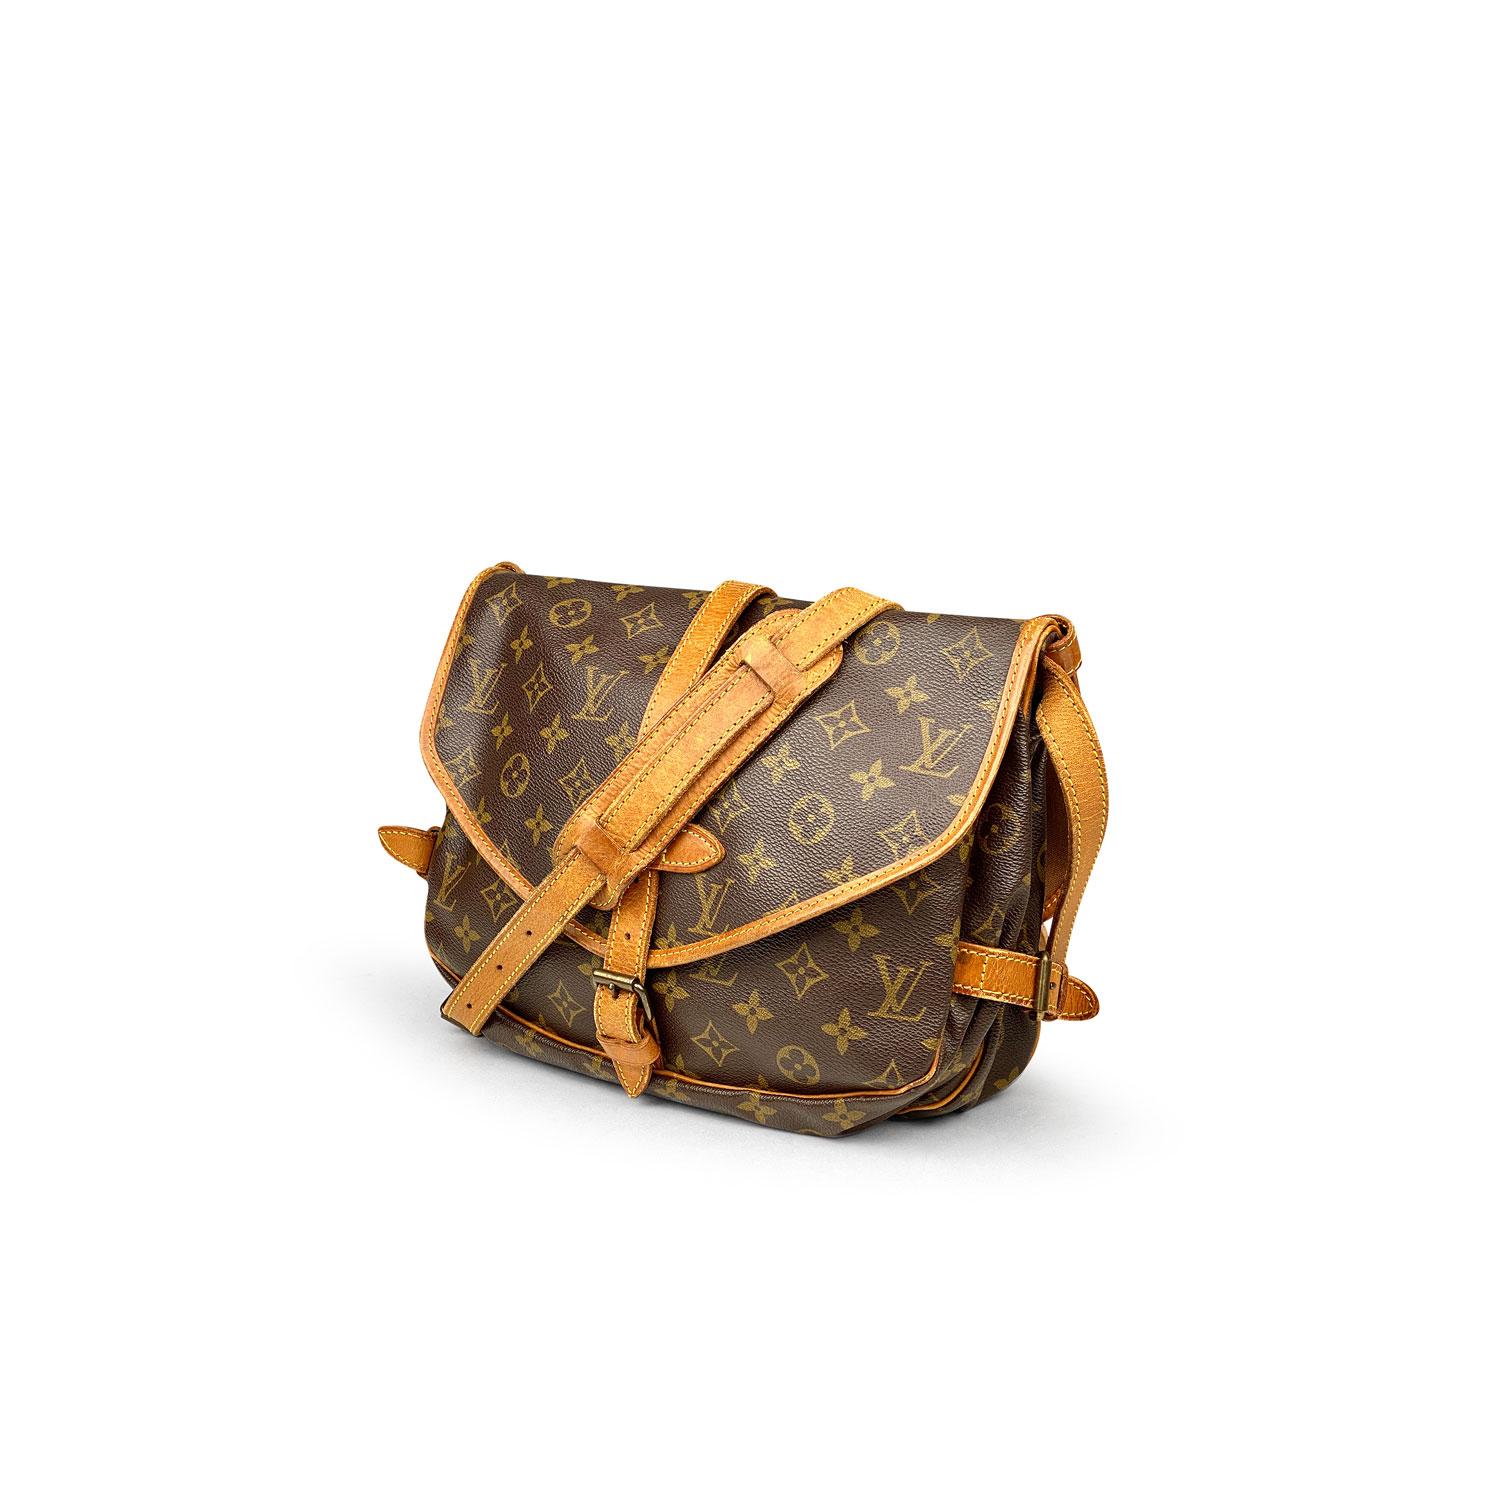 Brown and tan monogram coated canvas Louis Vuitton Saumur 30 with

- Brass hardware
- Tan vachetta trim
- Single flat shoulder strap featuring buckle adjustment
- Buckle expansions at sides
- Two compartments, tonal canvas lining, three slip pockets